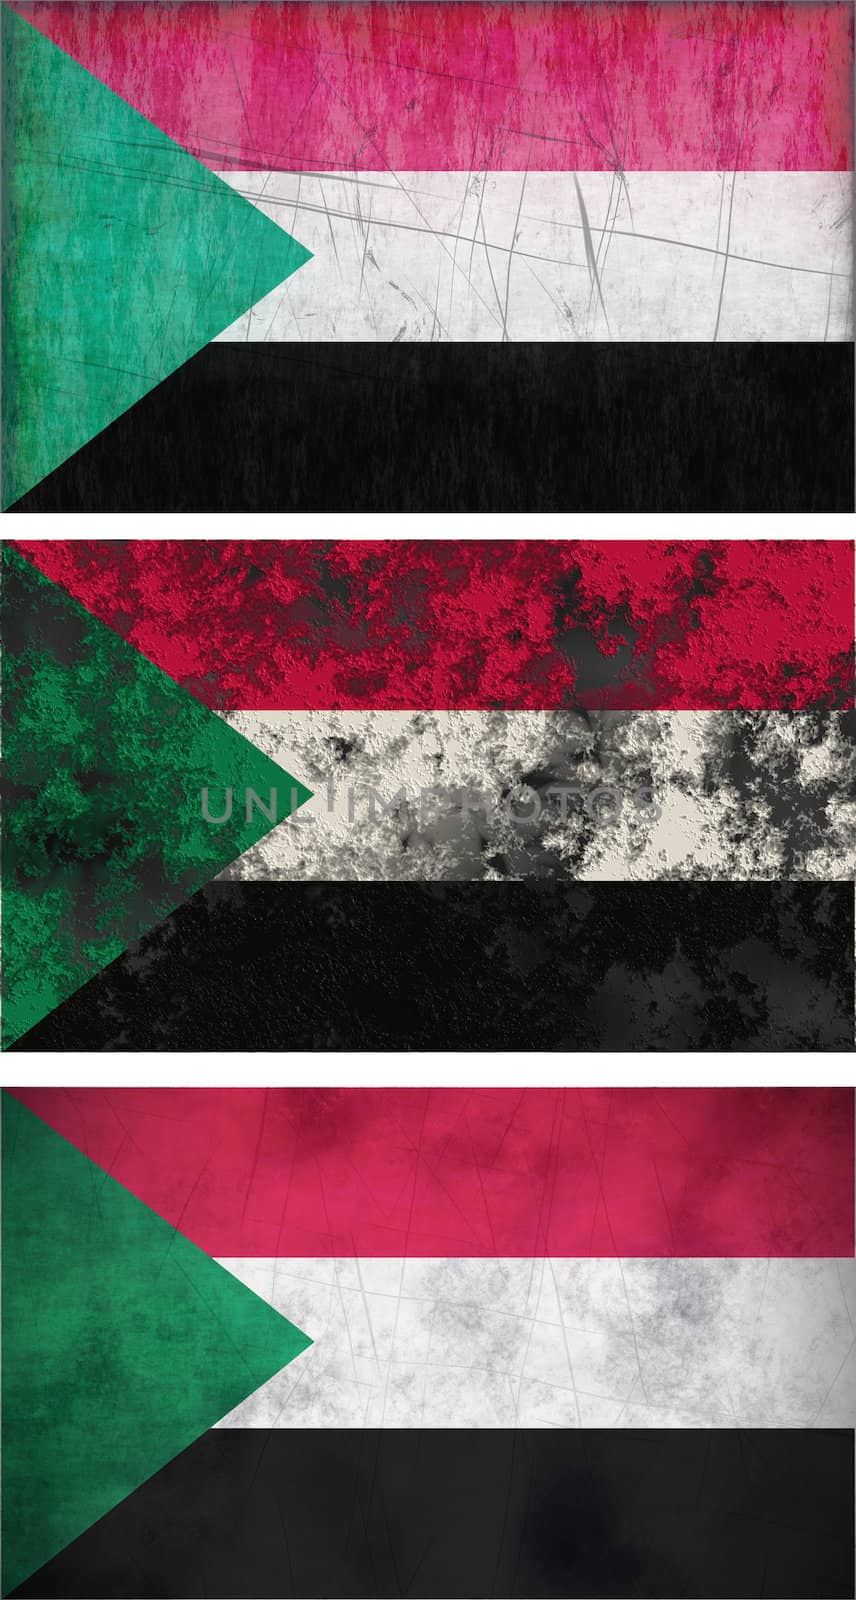 Great Image of the Flag of Sudan